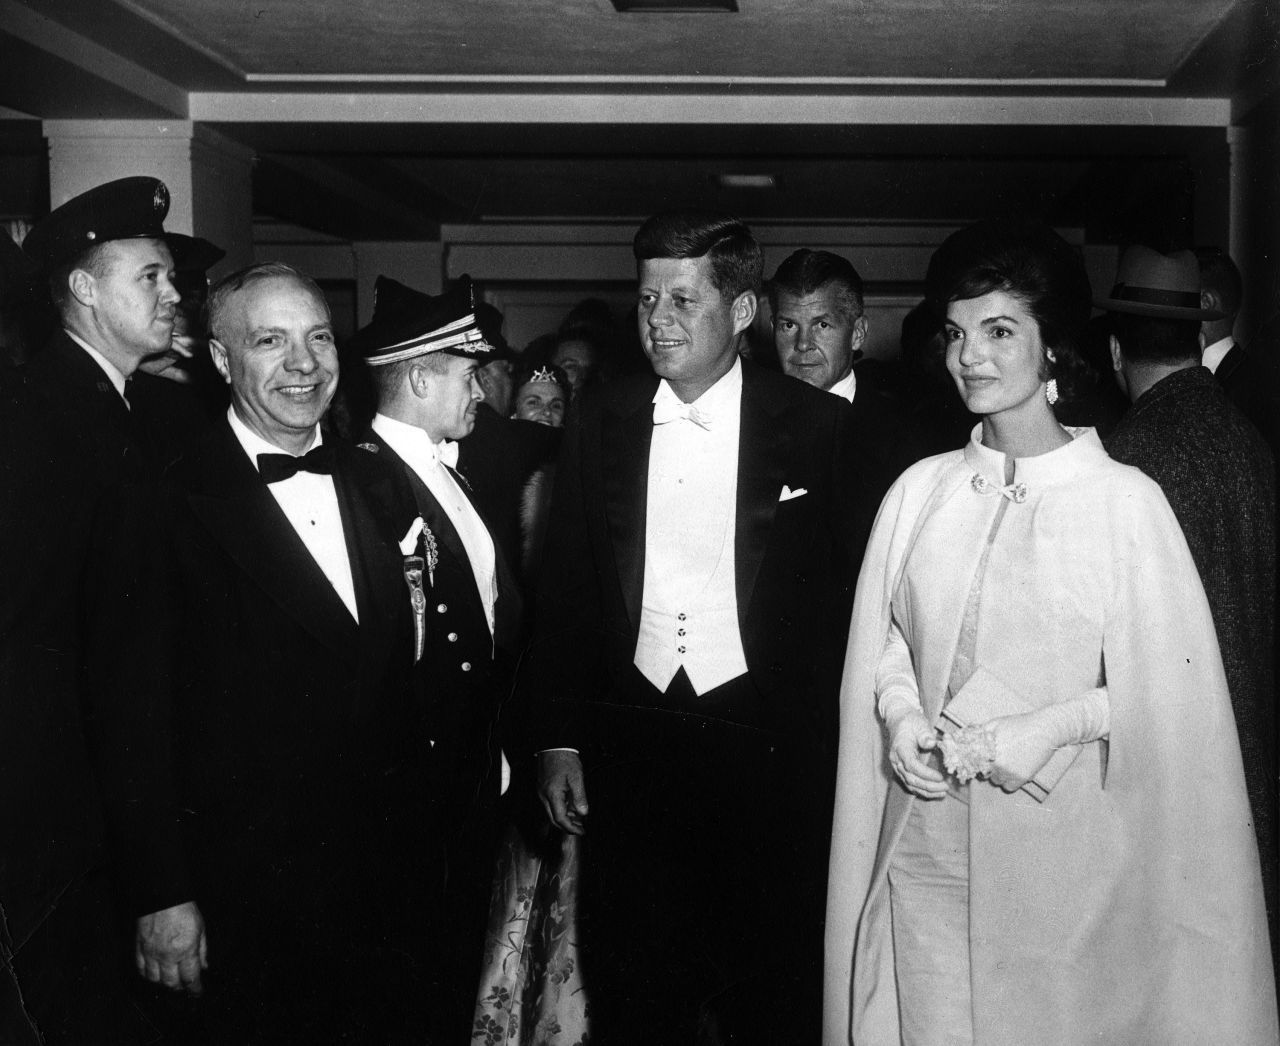 President John F. Kennedy and first lady Jacqueline Kennedy attend the inaugural ball. Jackie O often sought Vreeland's guidance on style, particularly American designers. "To say Diana Vreeland has dealt only with fashion trivializes what she has done. She has commented on the times in a wiseand witty manner. She has lived a life," Onassis said.